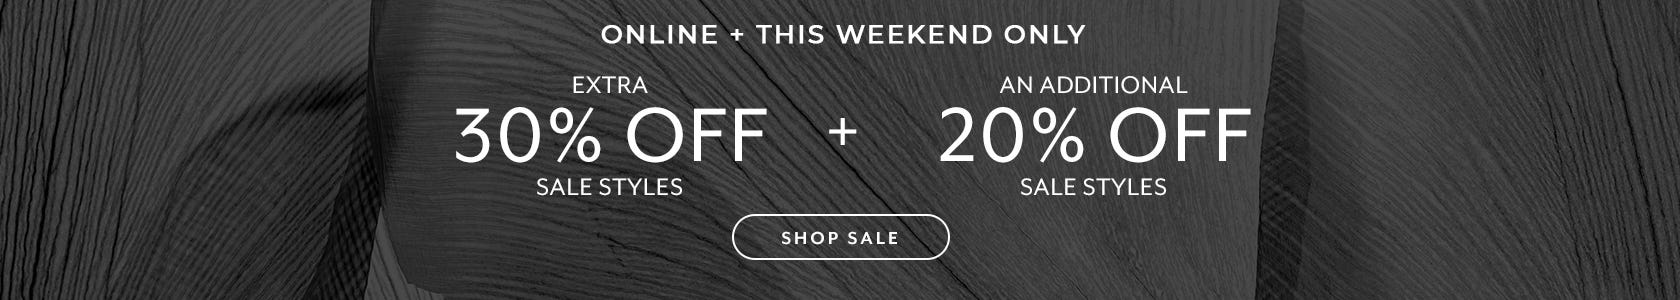 Online Only Sale on Markdowns